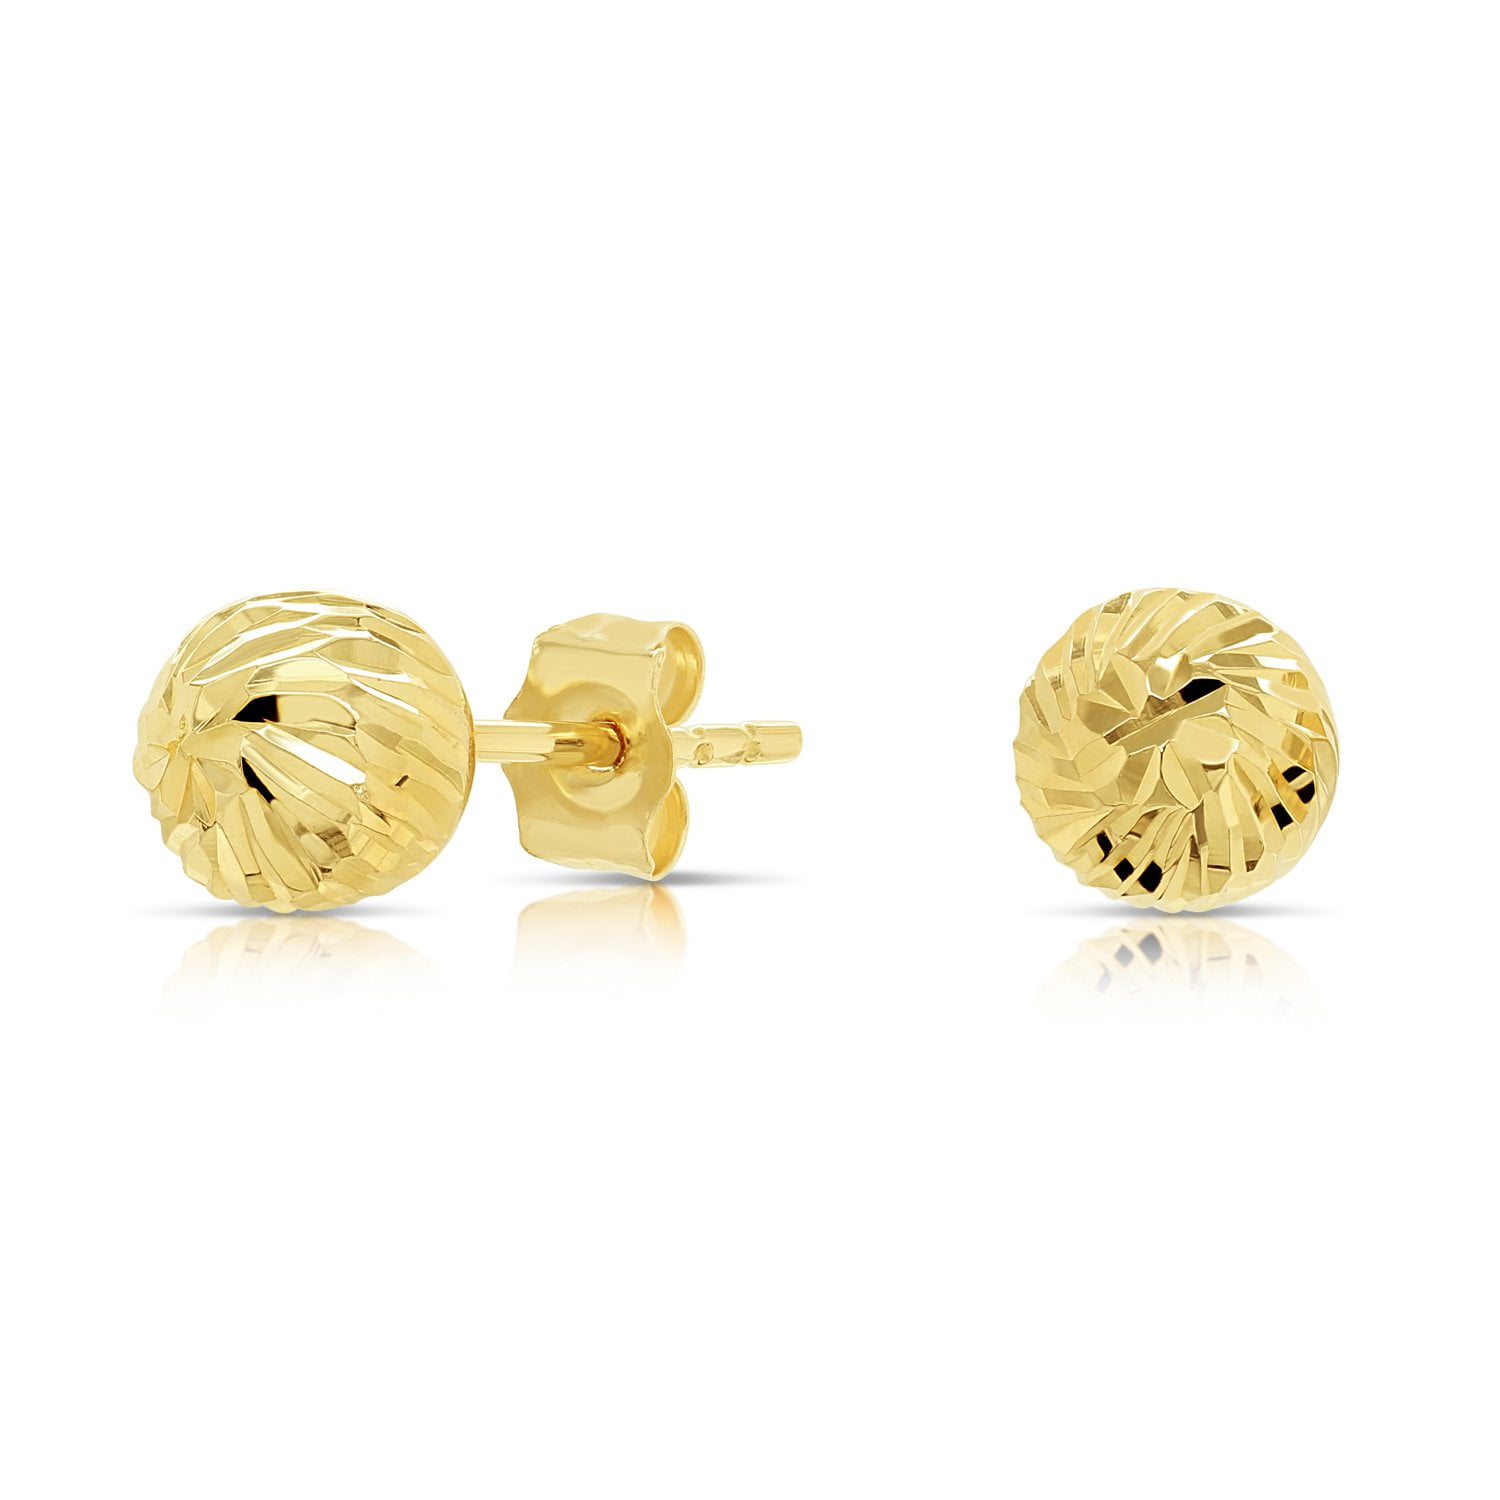 Gold earrings for men with Weight and Price l daily wear gold earrings... -  YouTube